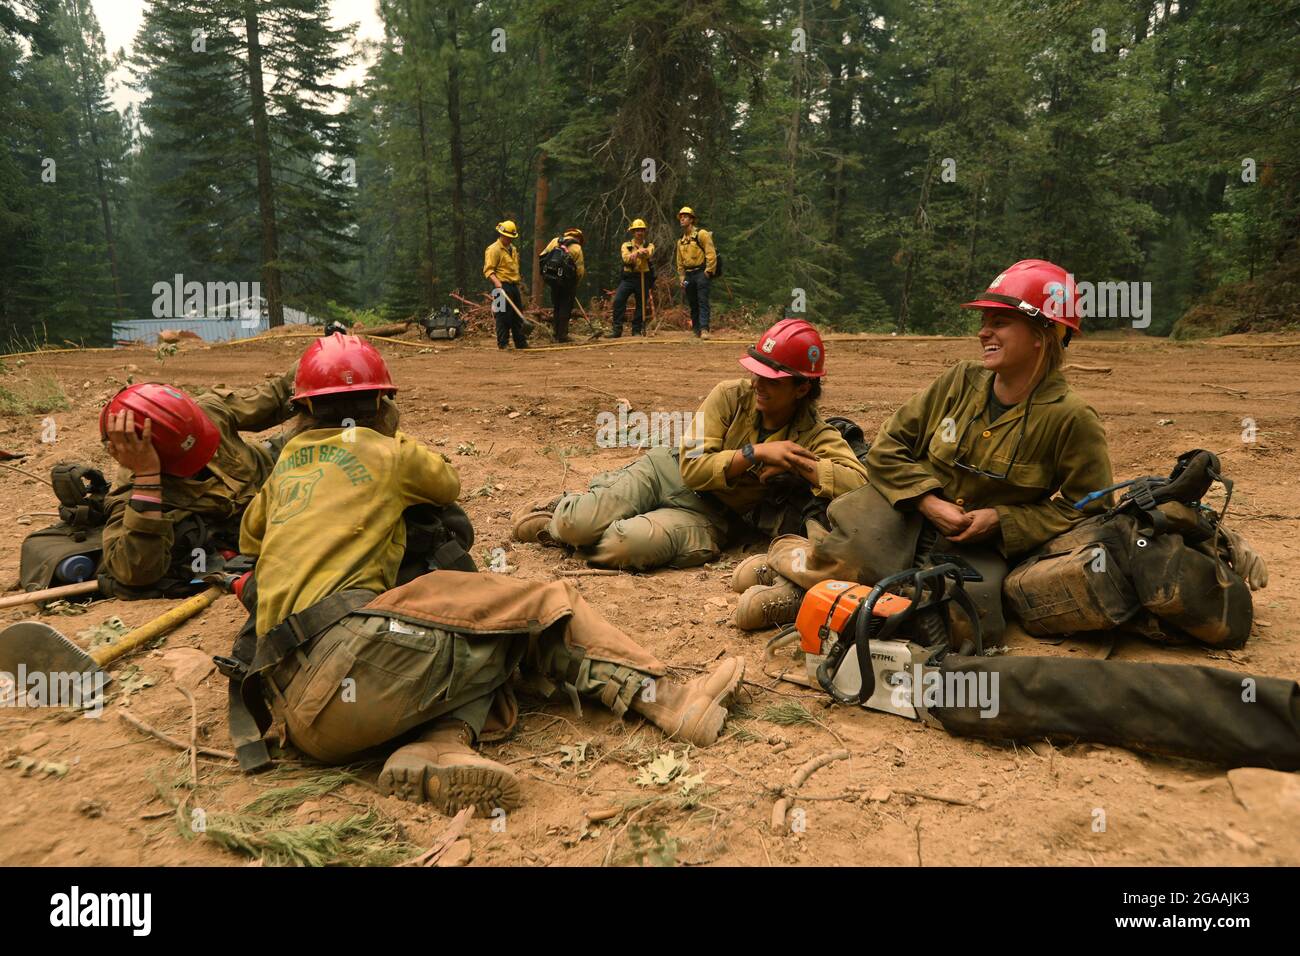 A hotshot crew from Redding with a strike team from the LAFD work the